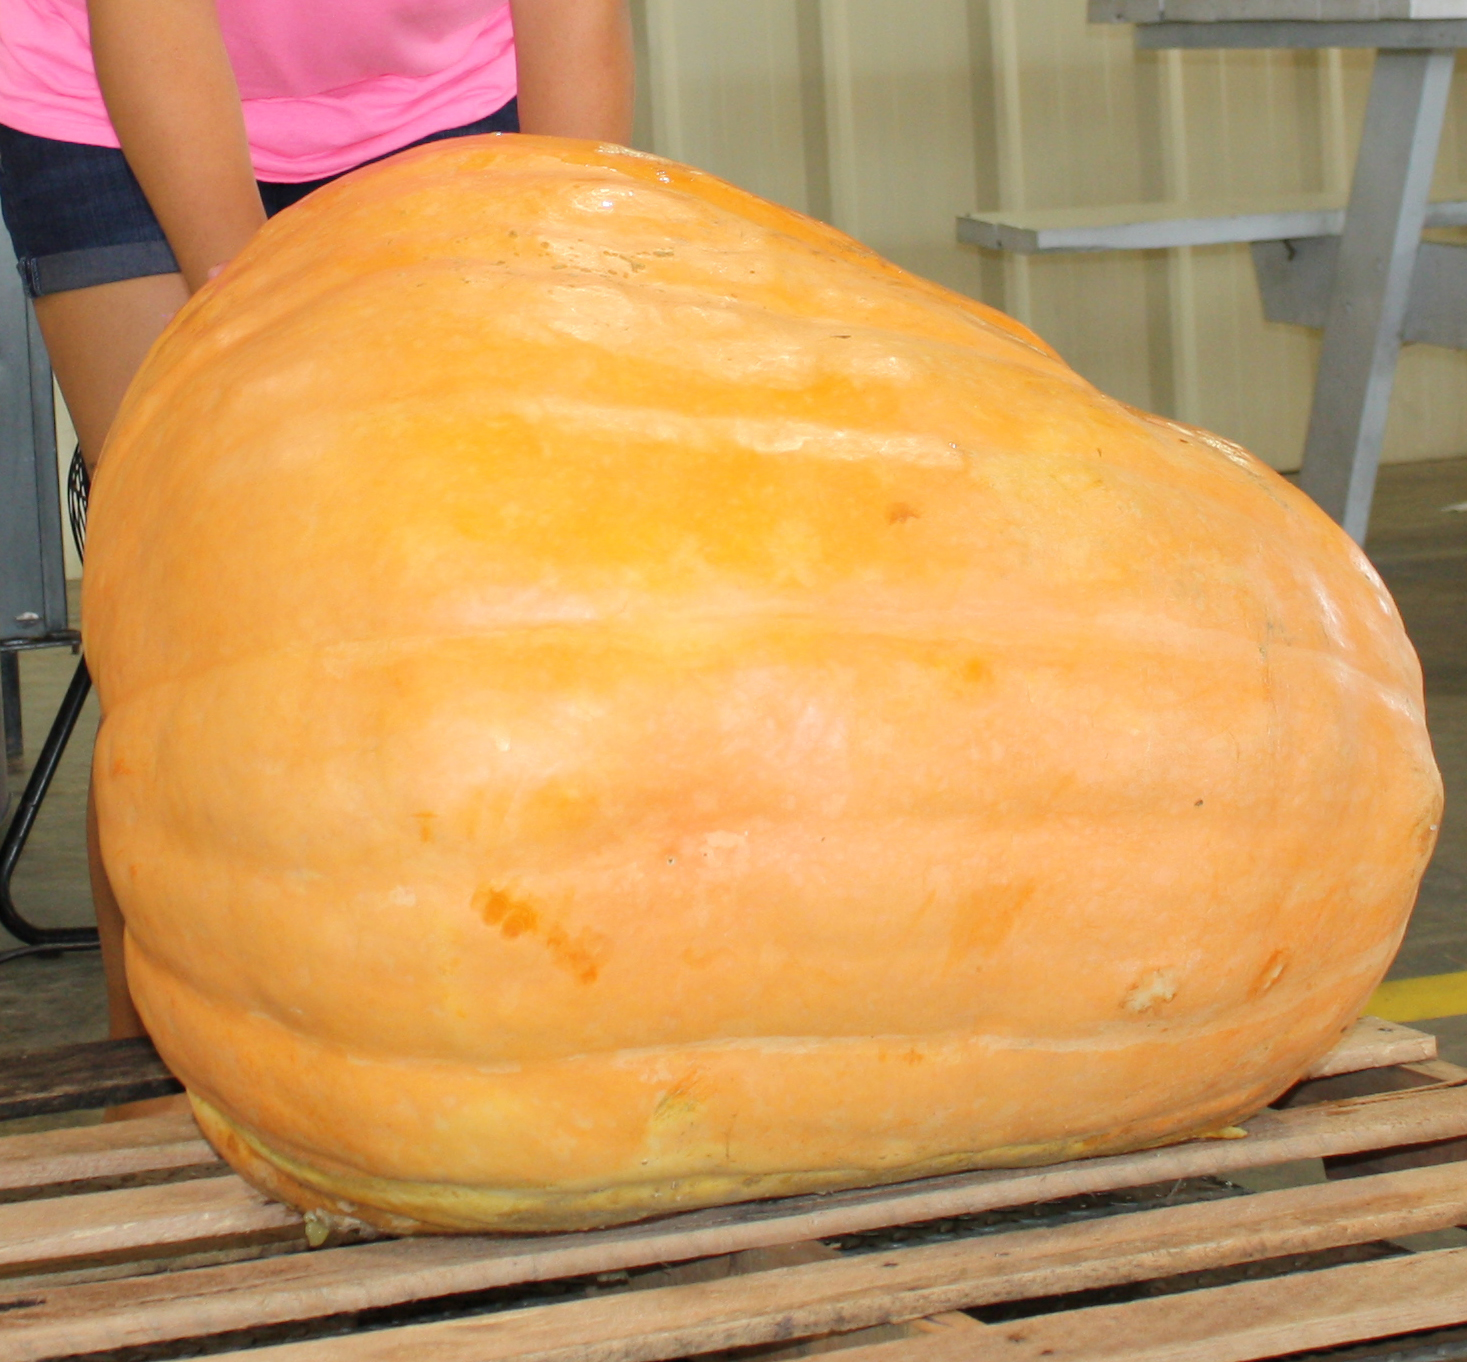 Ree Daniel, of Tift County, won first-place with her 252-pound pumpkin in the 2014 Georgia 4-H Pumpkin Growing Contest.